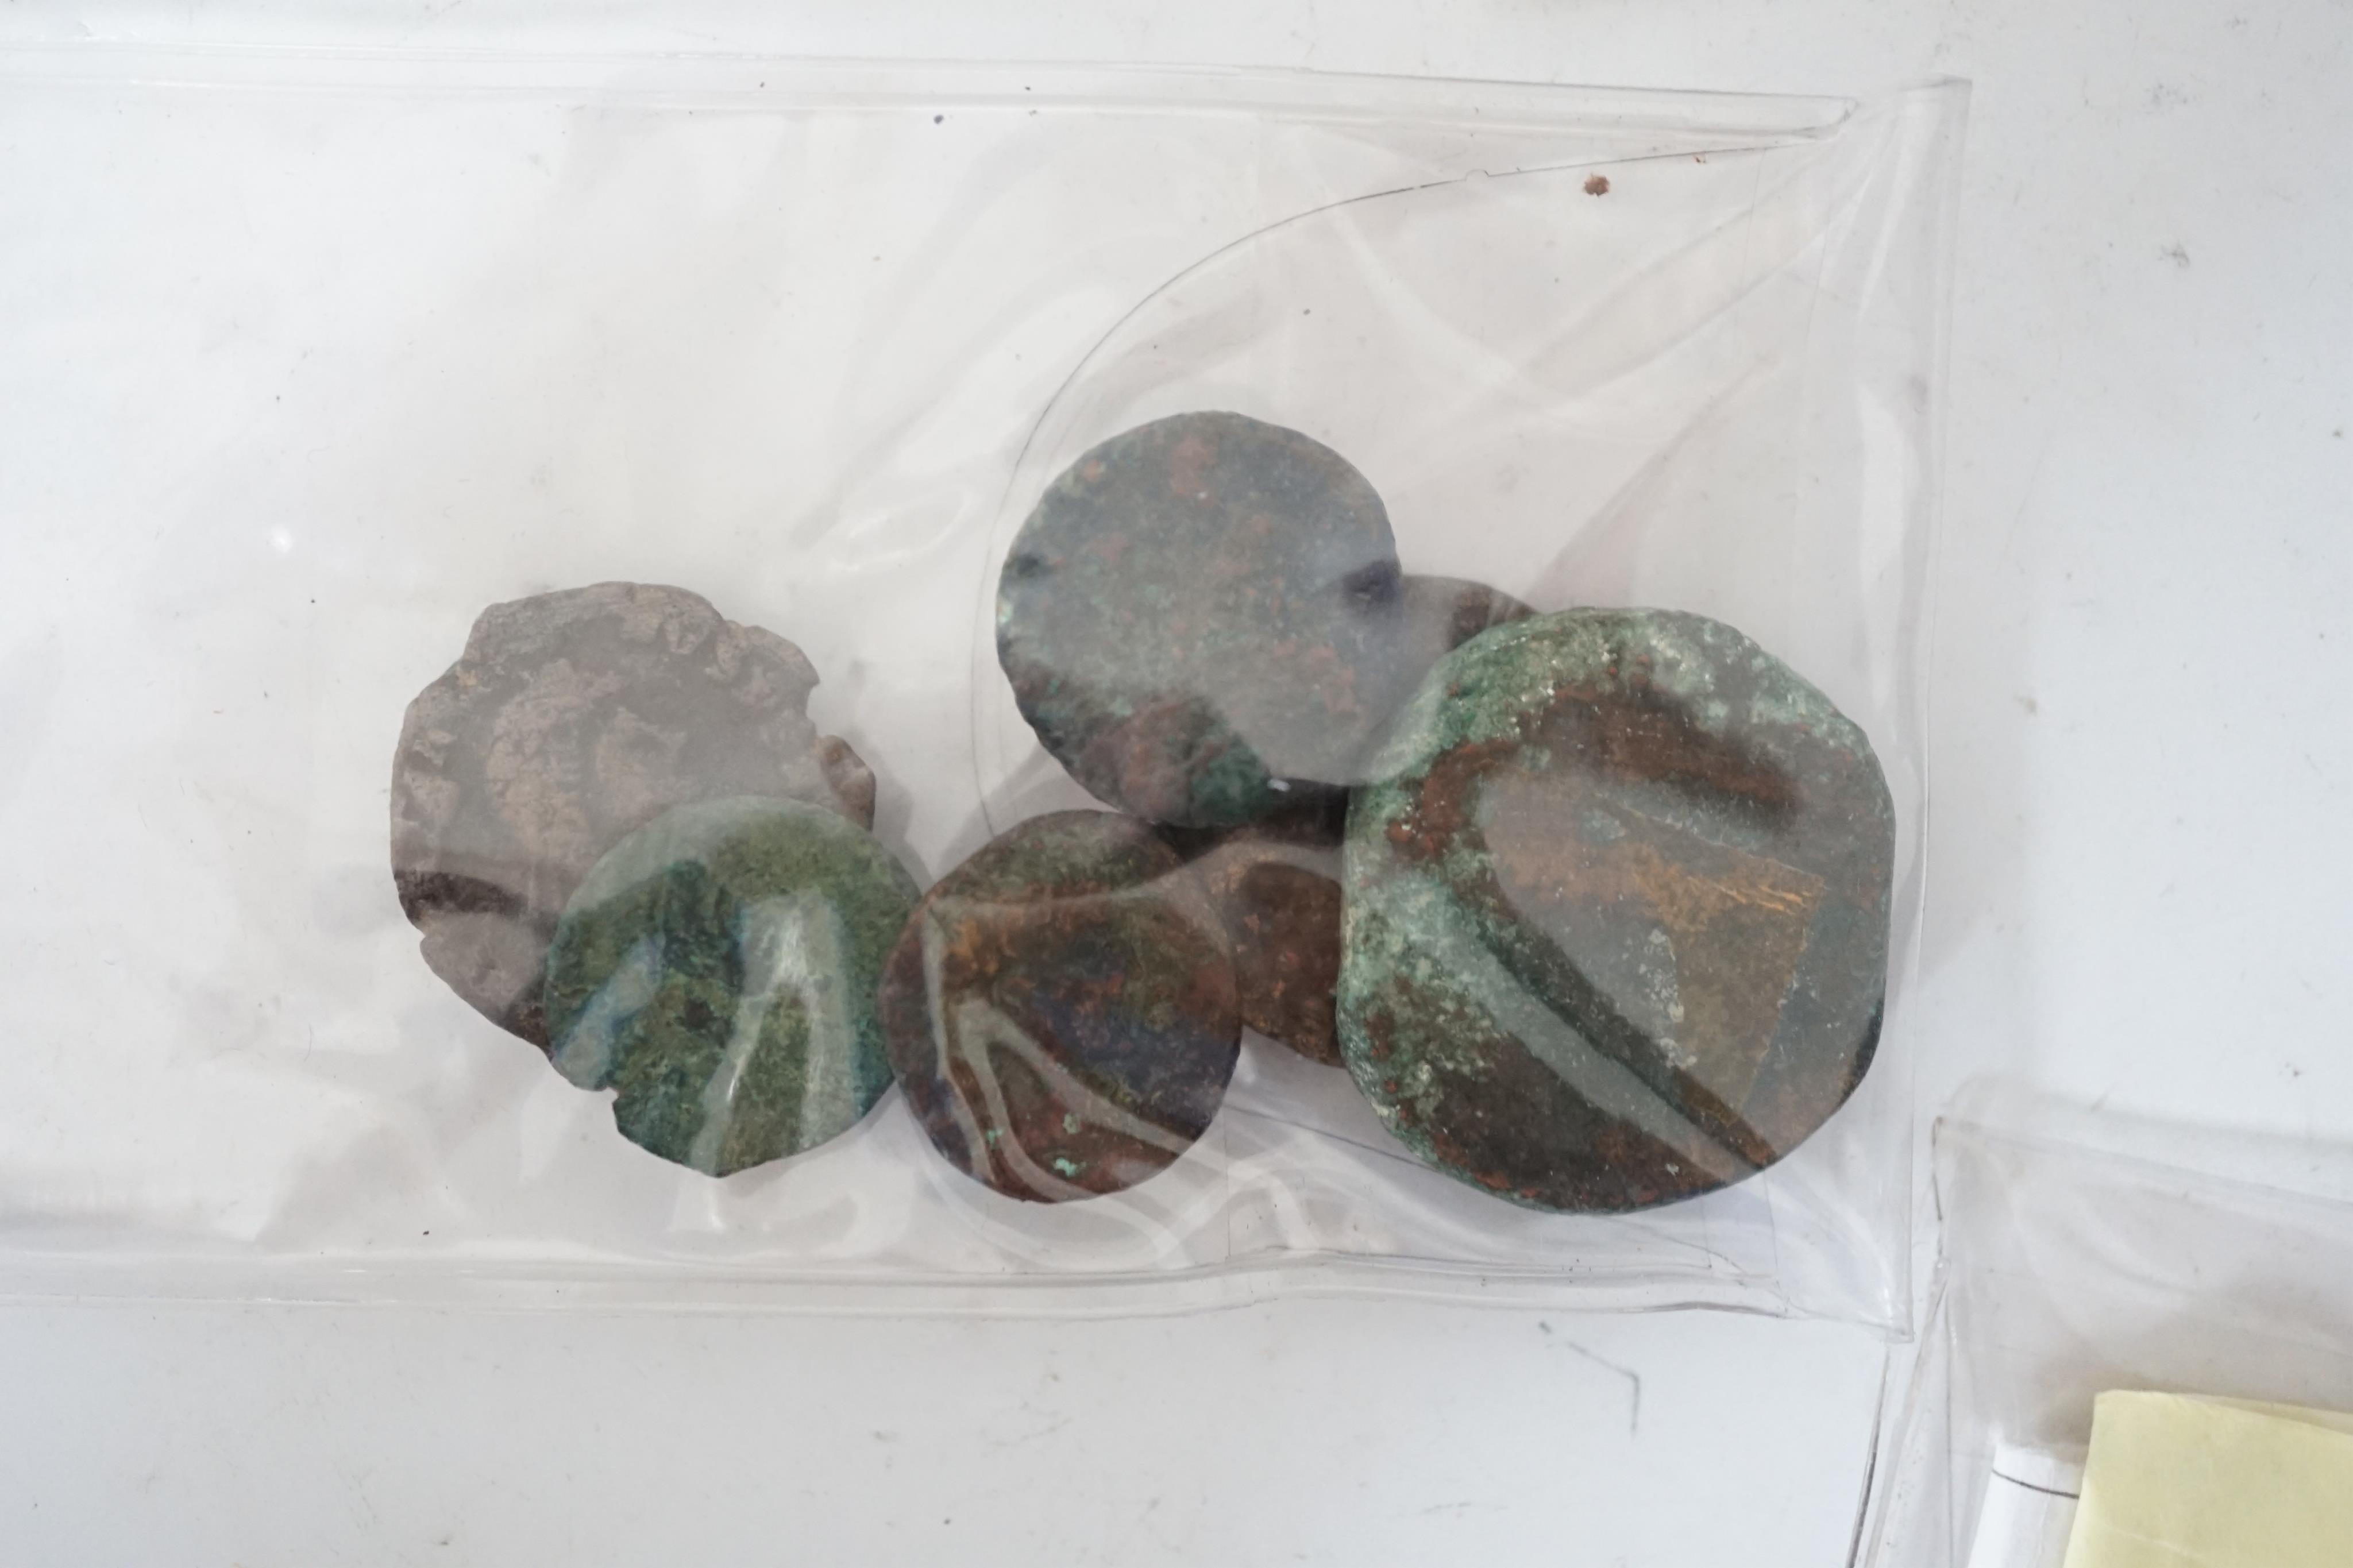 British Roman coinage, including Claudius II Gothicus AE Antoninianus, VF, most in poor condition and detectorist finds